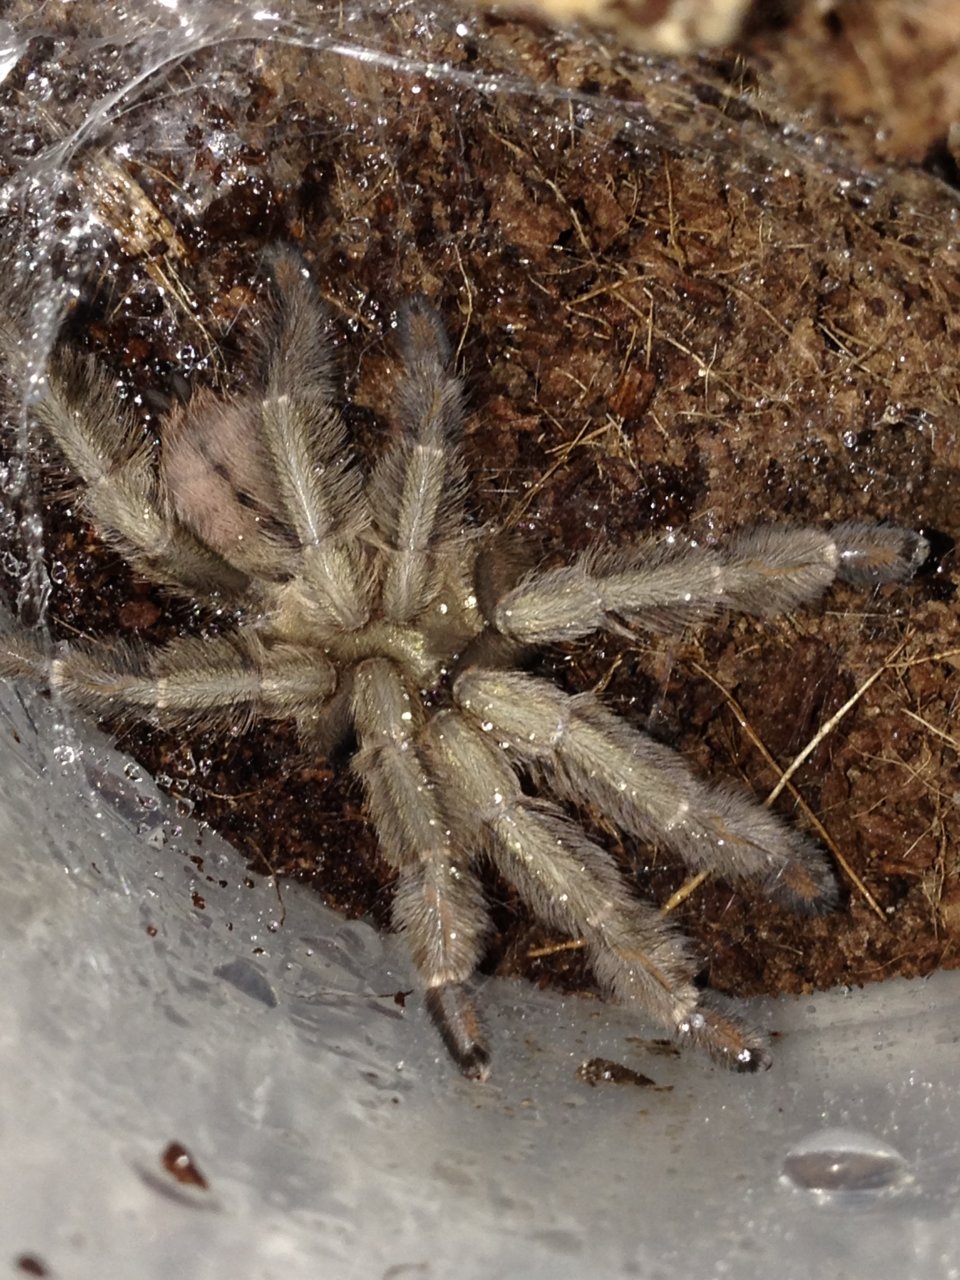 P. cambridgei Freshly Molted Unsexed